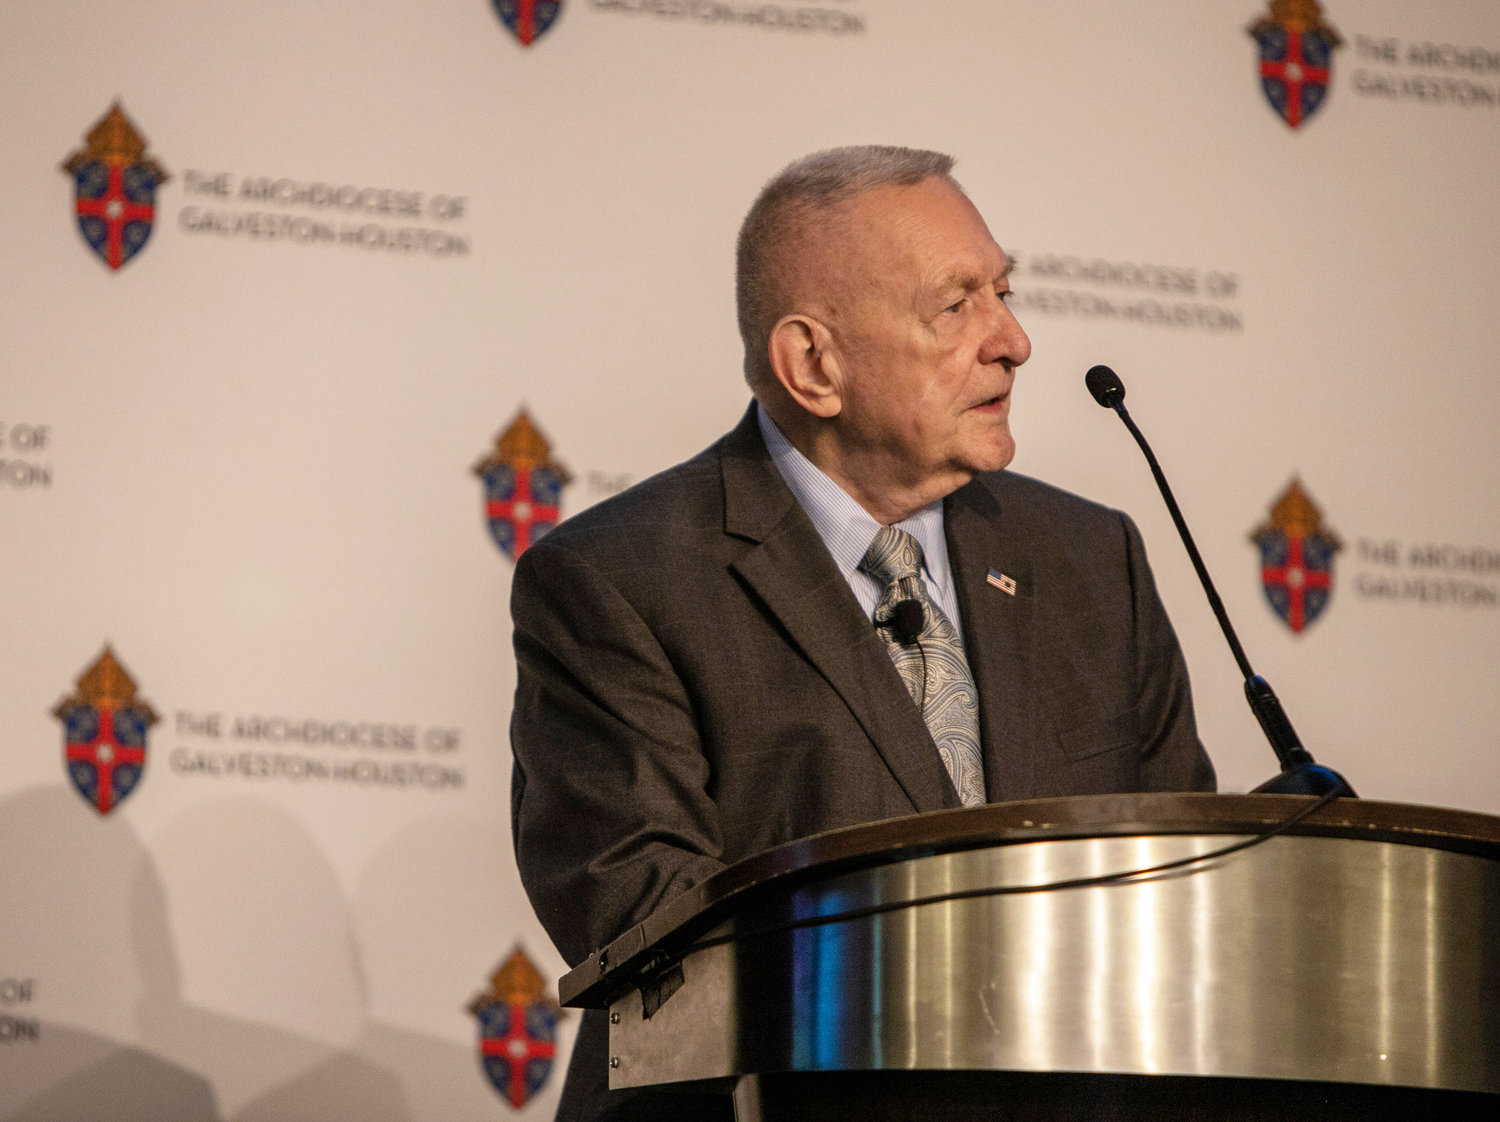 Gene Kranz, former flight director for Apollo 11, speaks during the 2019 Archdiocese of Galveston-Houston Prayer Breakfast in Houston July 30. Kranz, who served as the event’s speaker, is a parishioner at Shrine of the True Cross Catholic Church in Dickinson, Texas, near Houston.